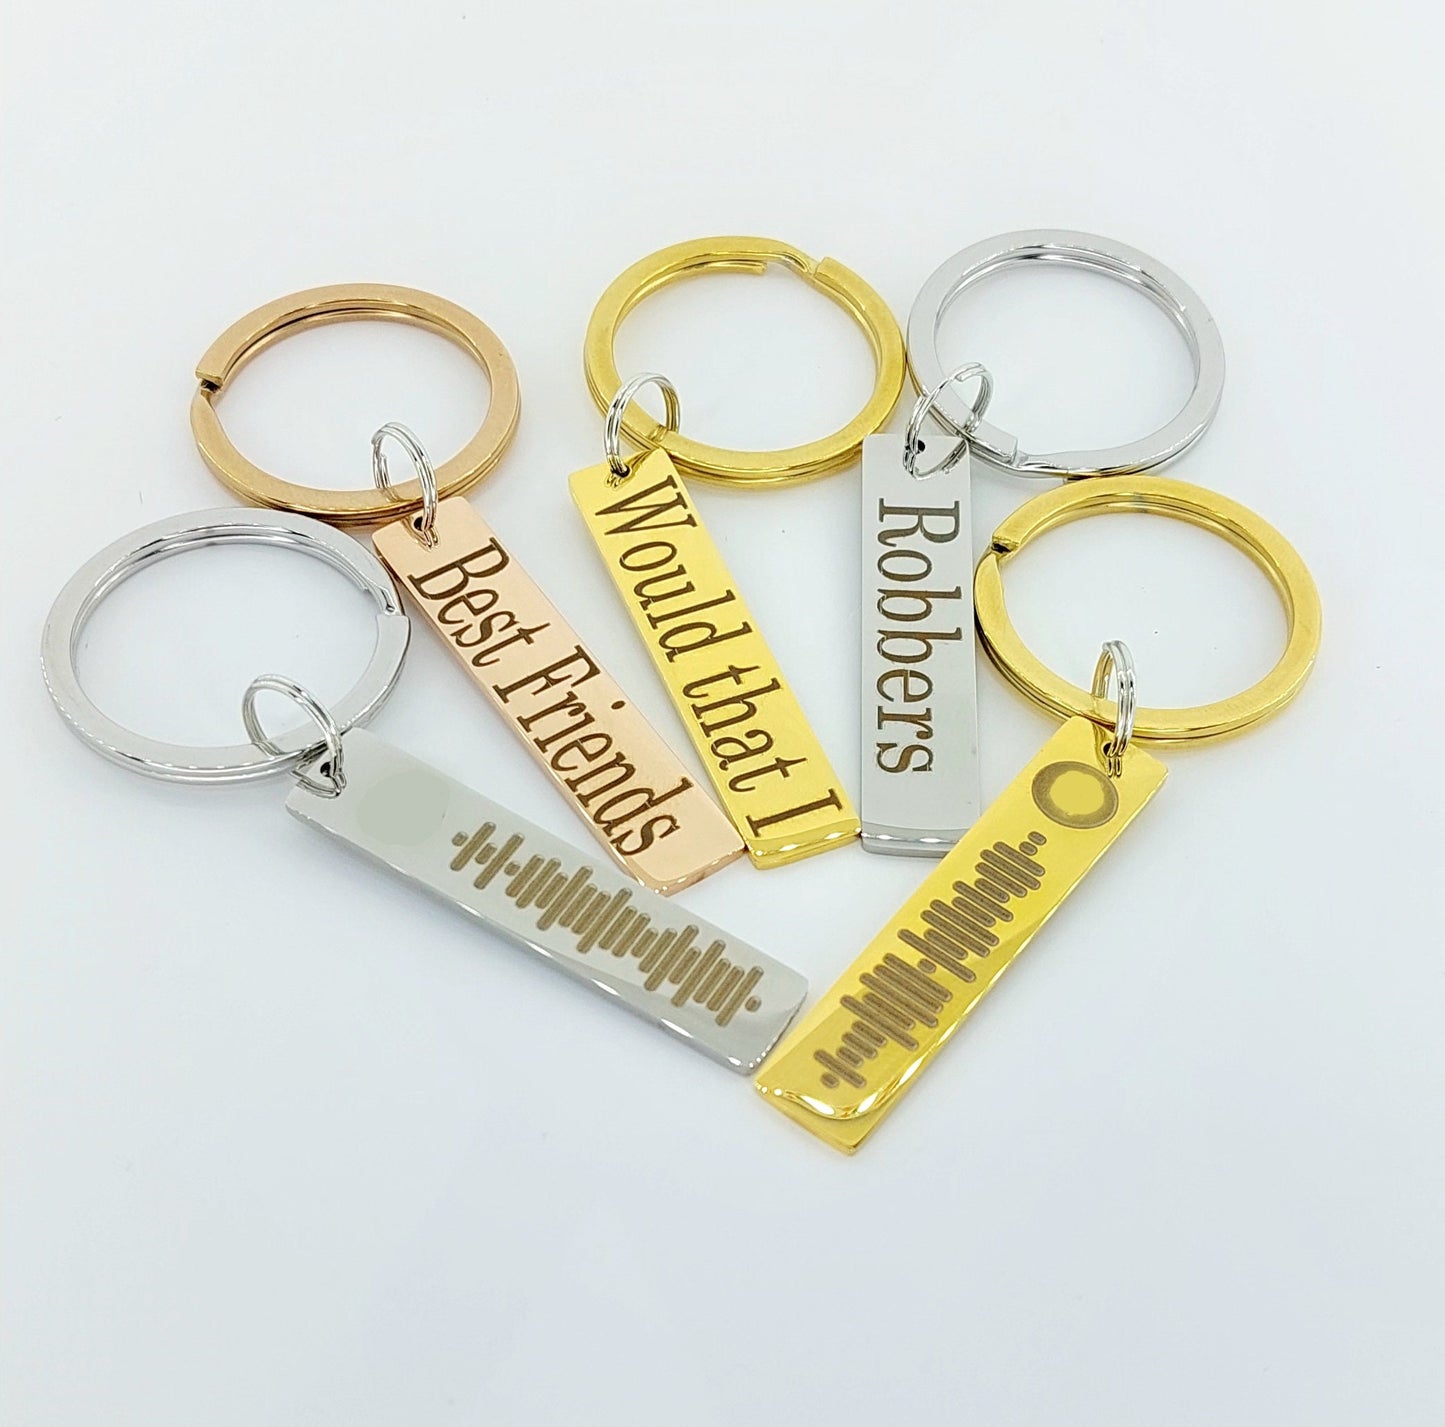 Scanable Love Song Code- Love Symbols Engraved, High Quality Stainless Steel keyring, Engraved KeyRing, Drive Safe KeyRing, Couple Key Ring